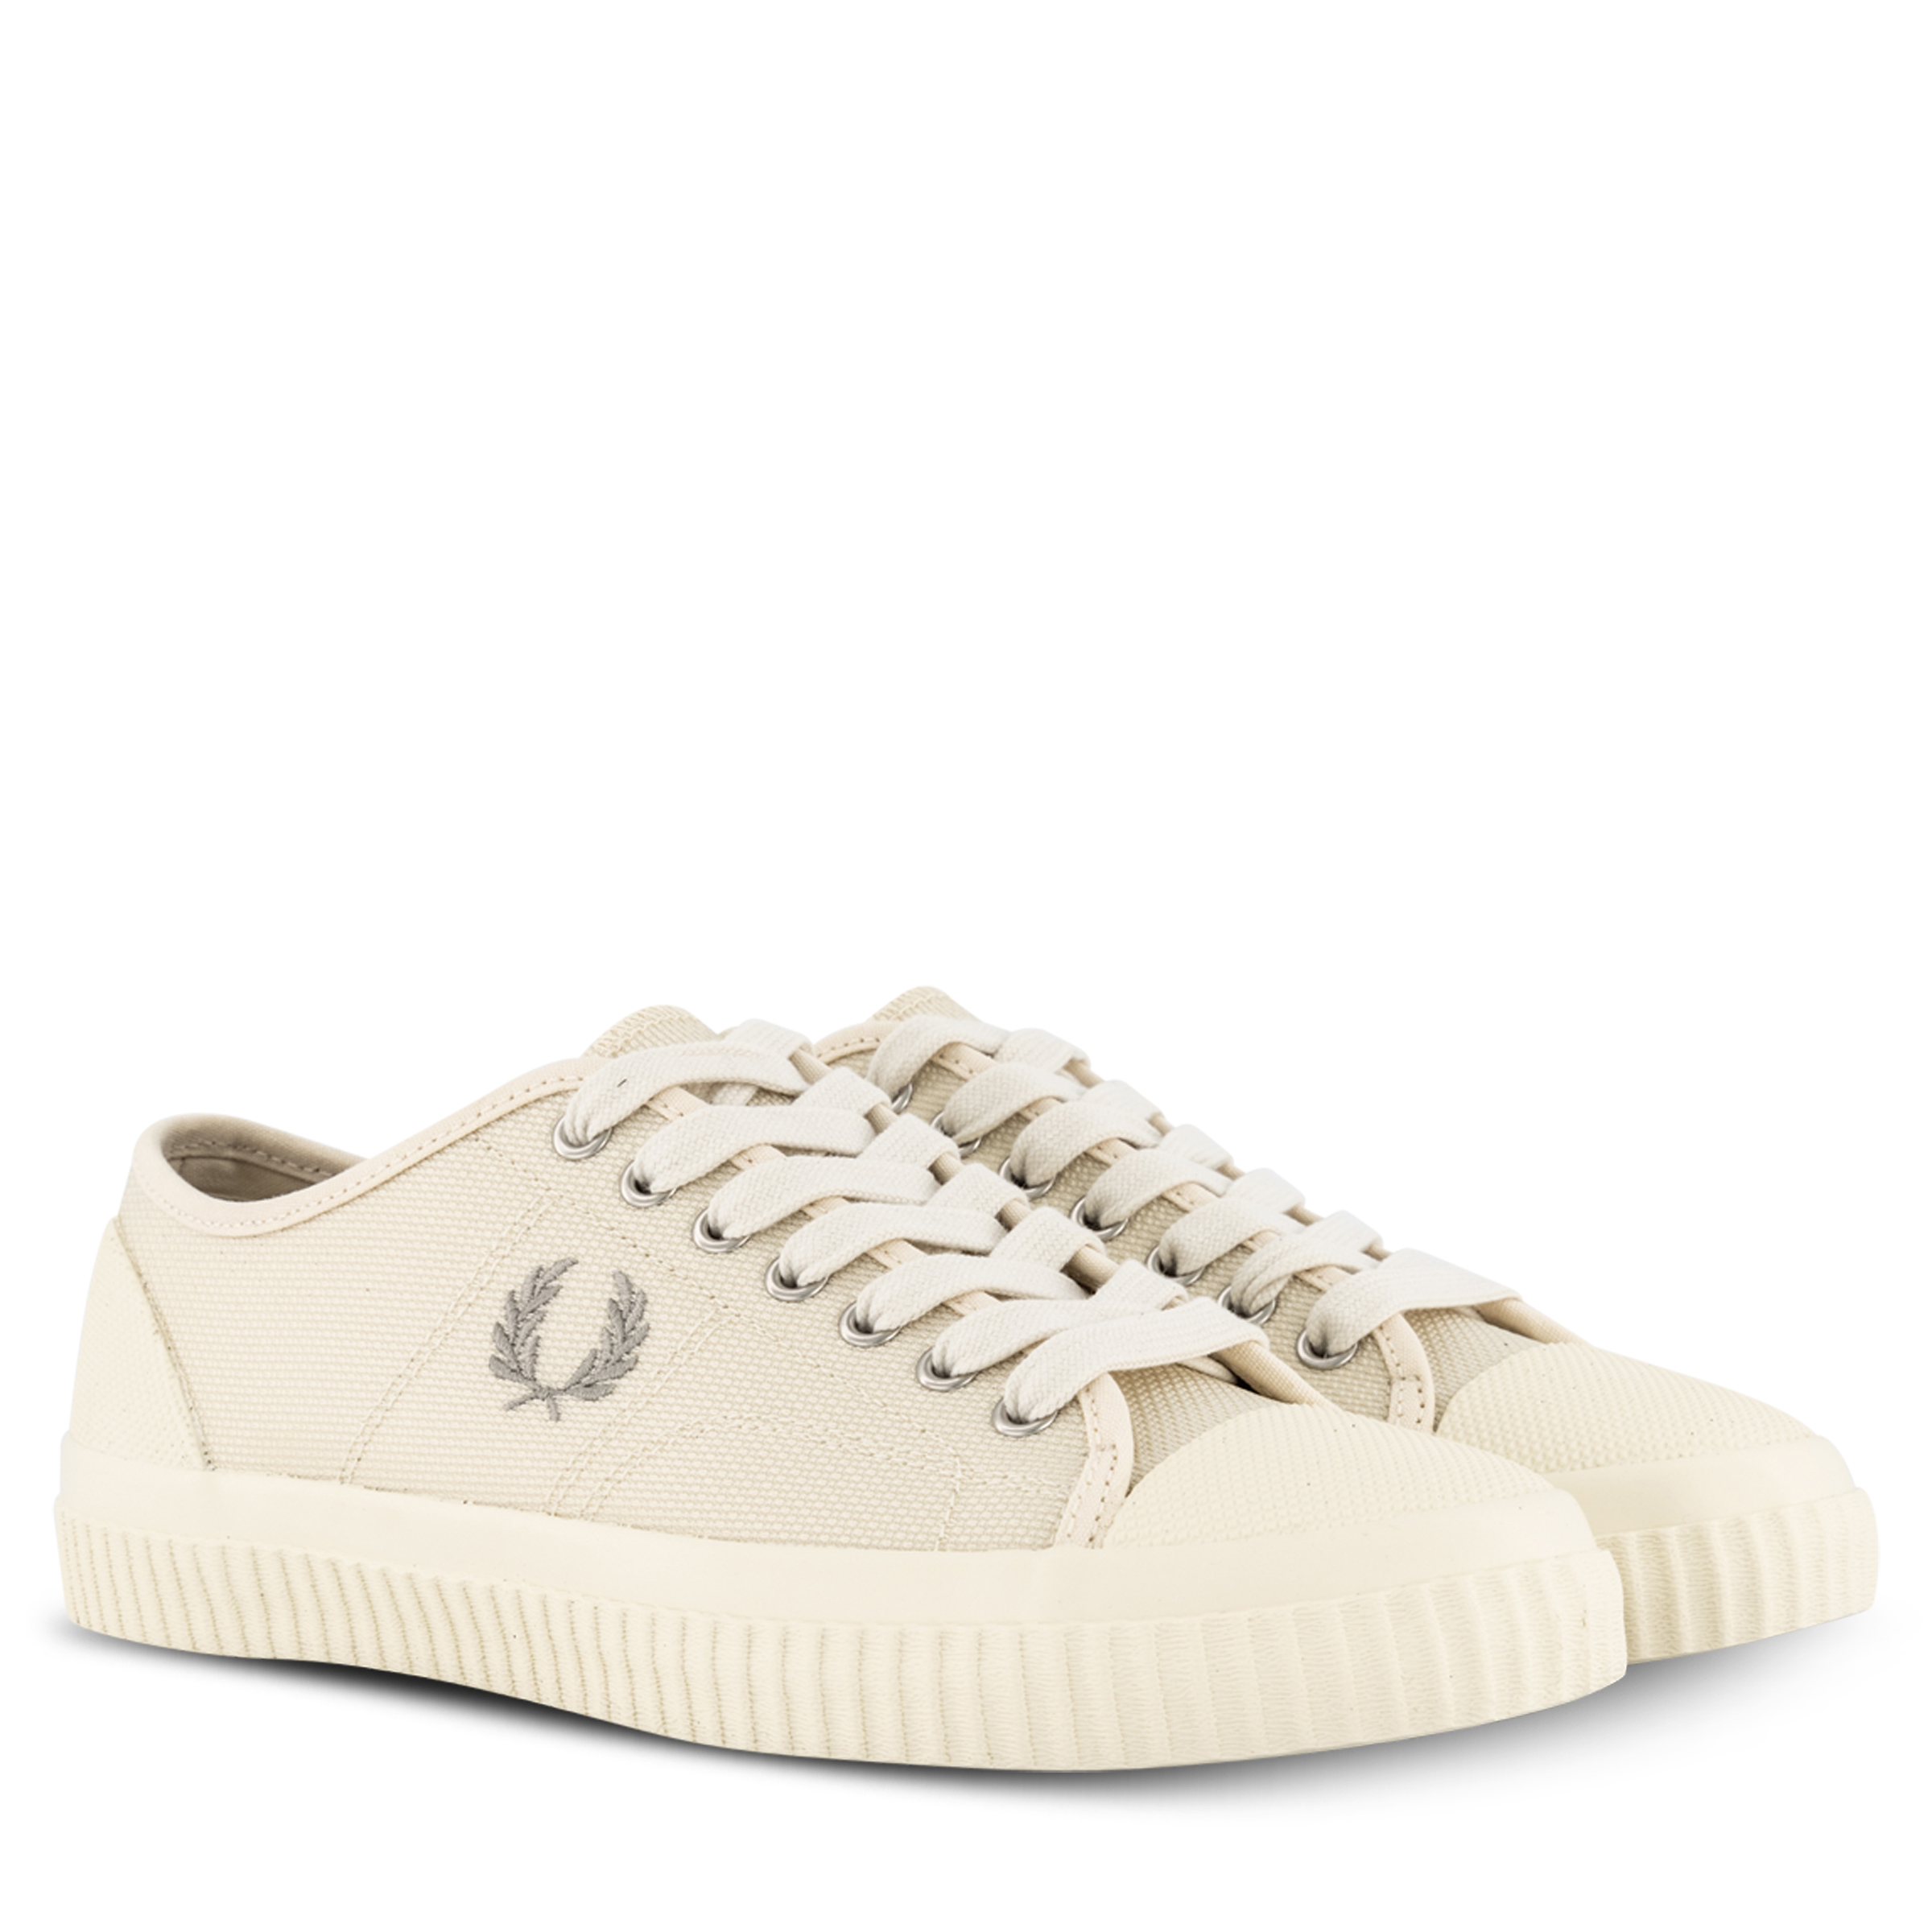 Fred Perry Hughes Low 254 Porcelain | Hype DC